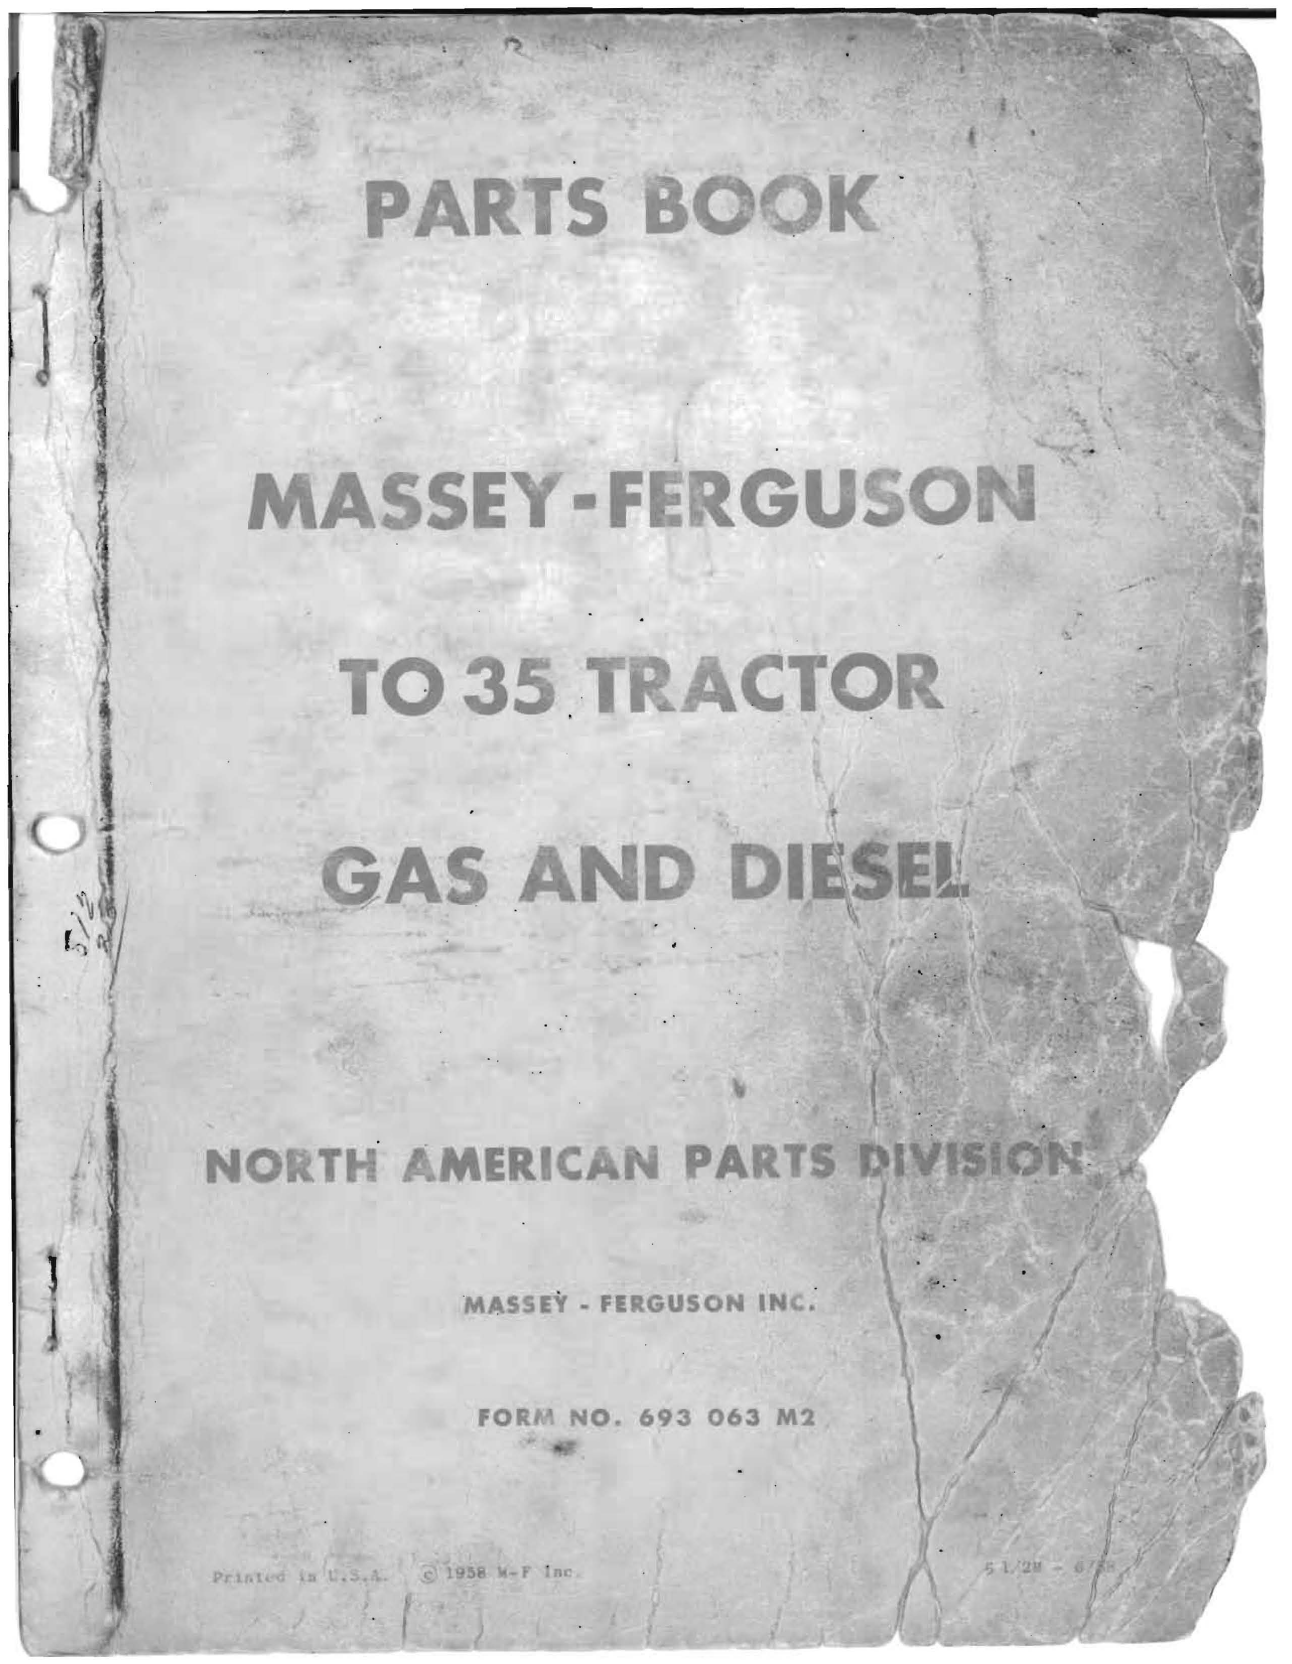 1954-1960 Massey Ferguson TO 35 gas & diesel parts manual Preview image 1